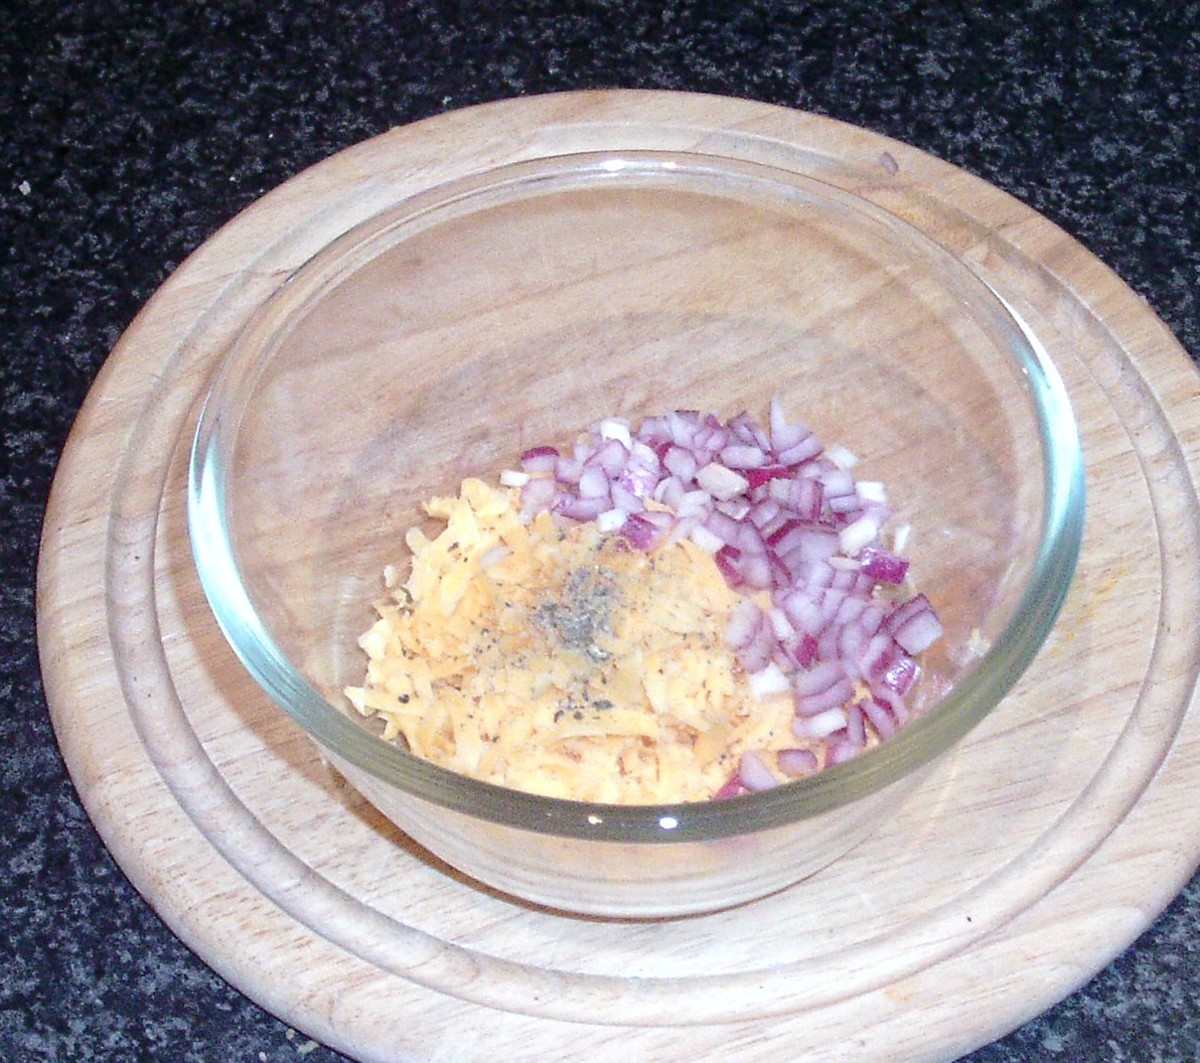 Preparing cheese and onion burger topping